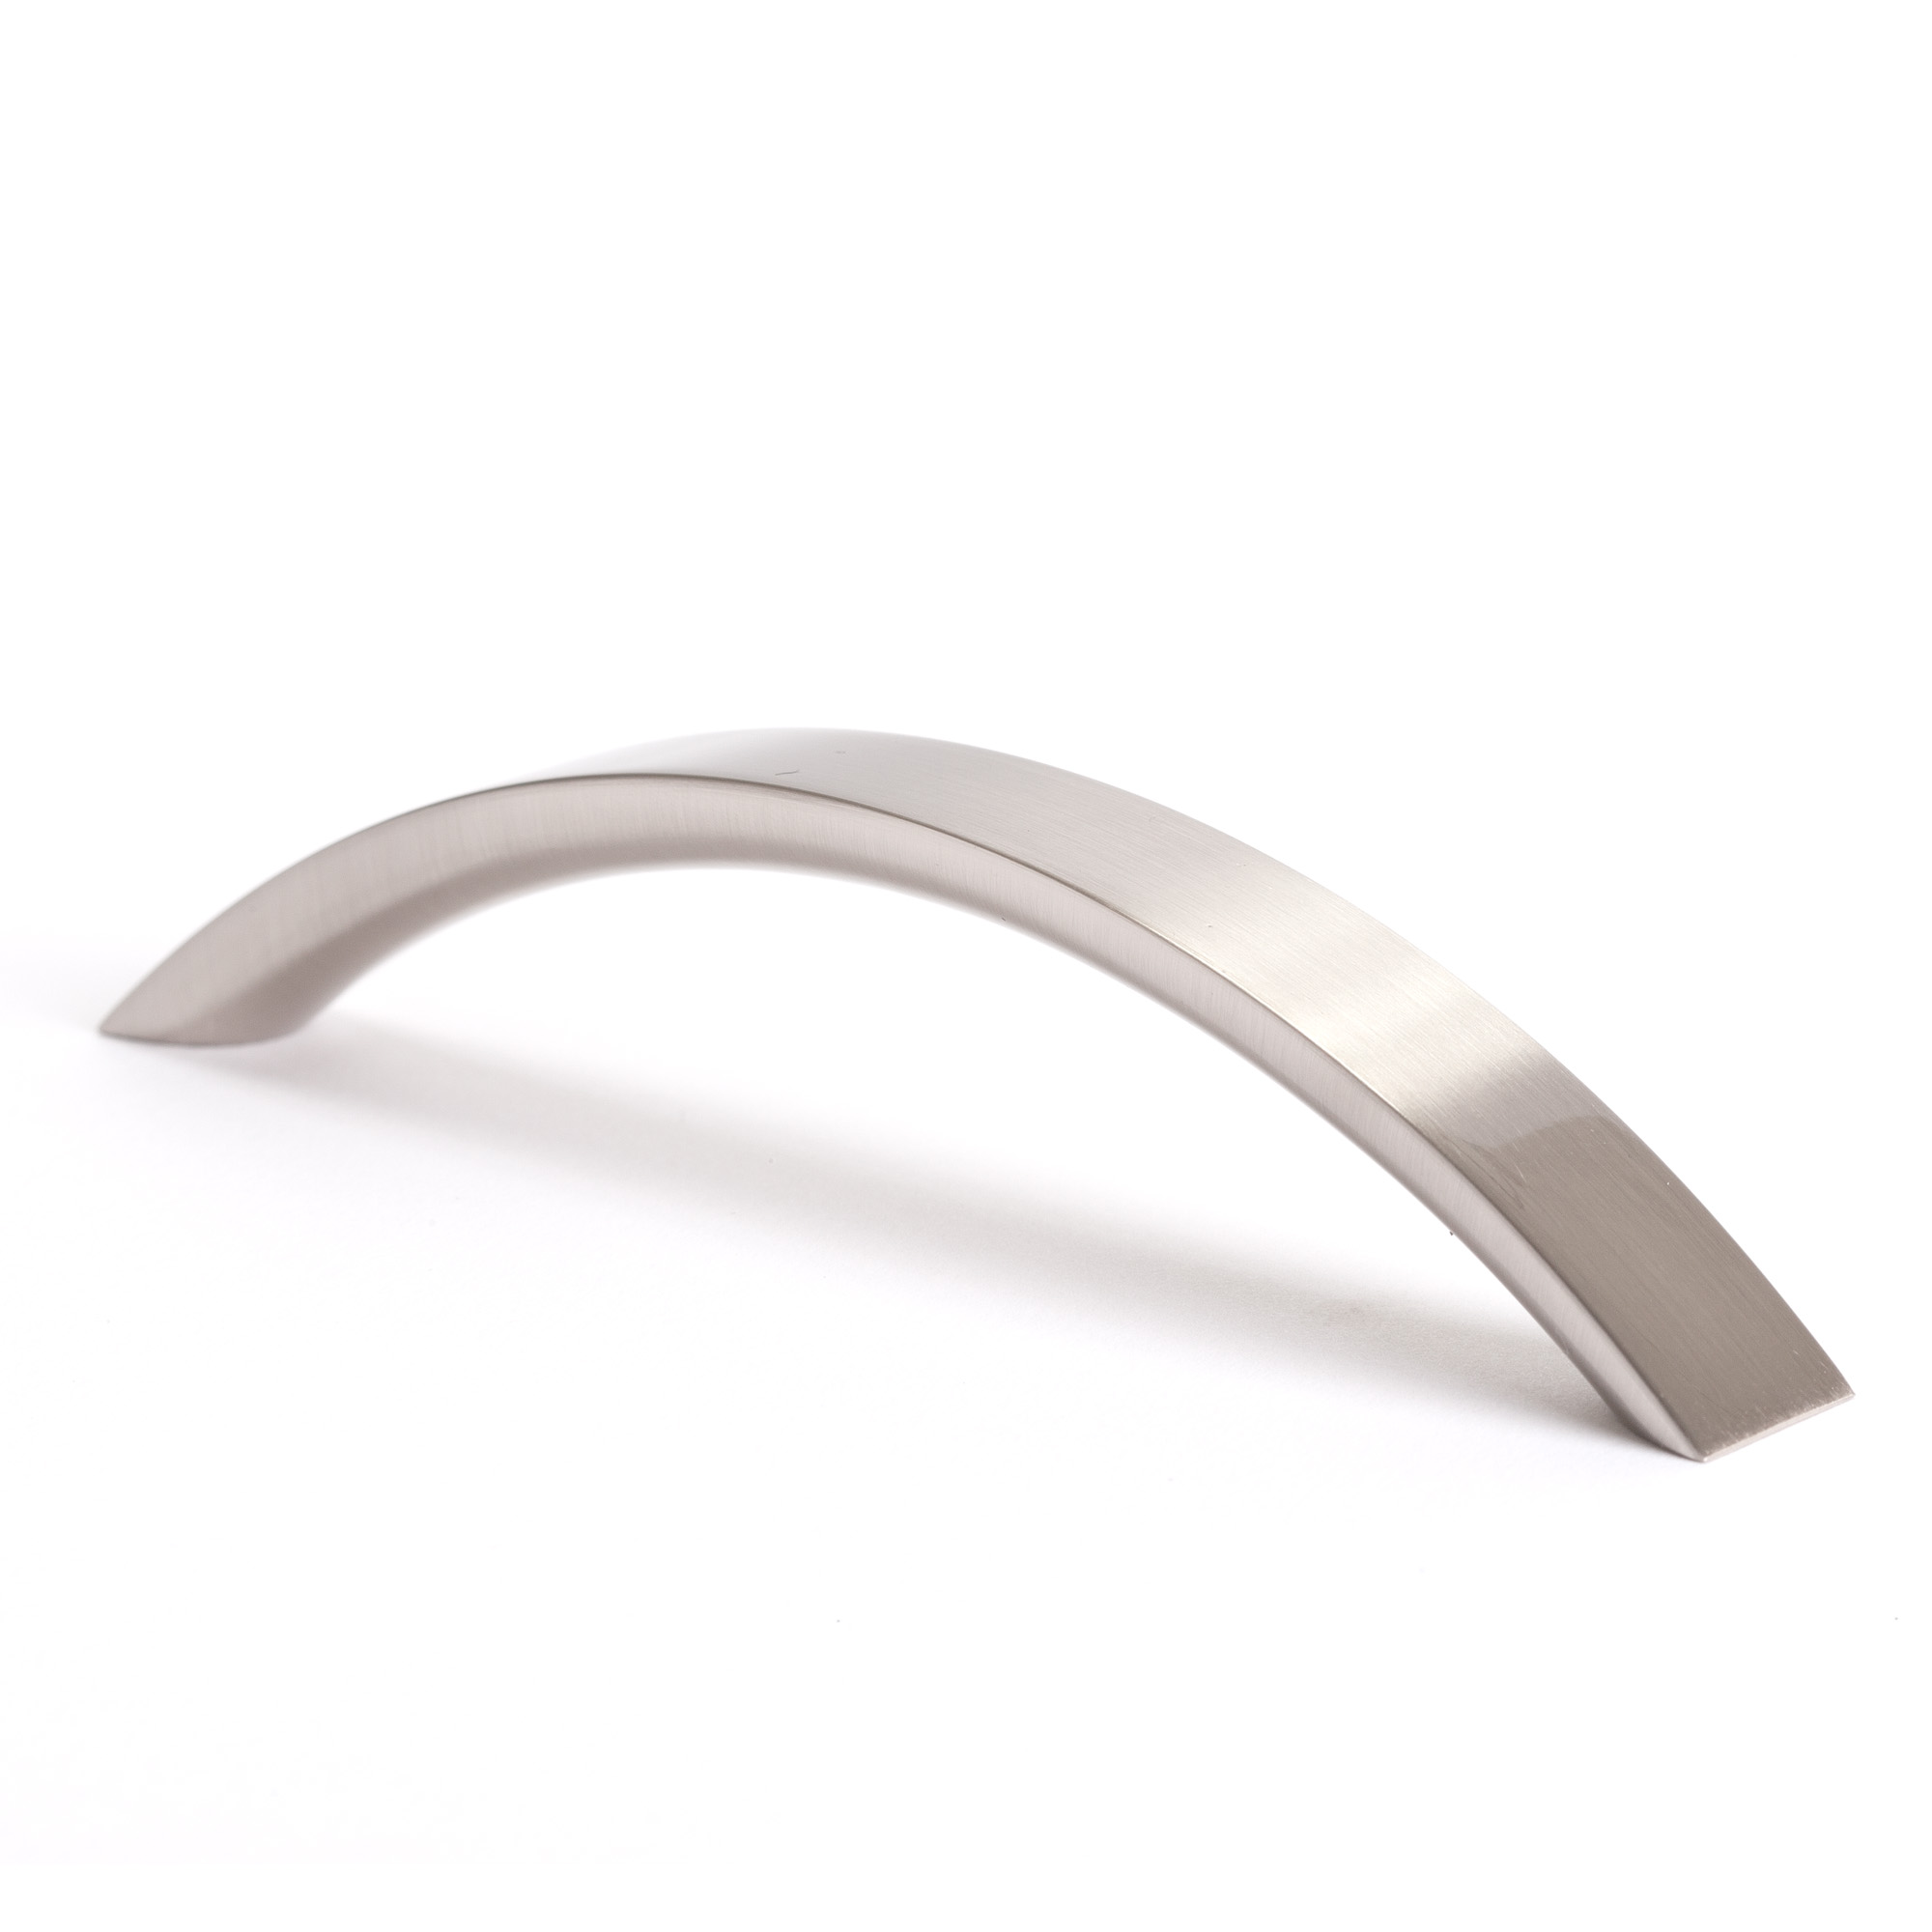 Advantage Plus 4 5-5/8" Pull in Brushed Nickel